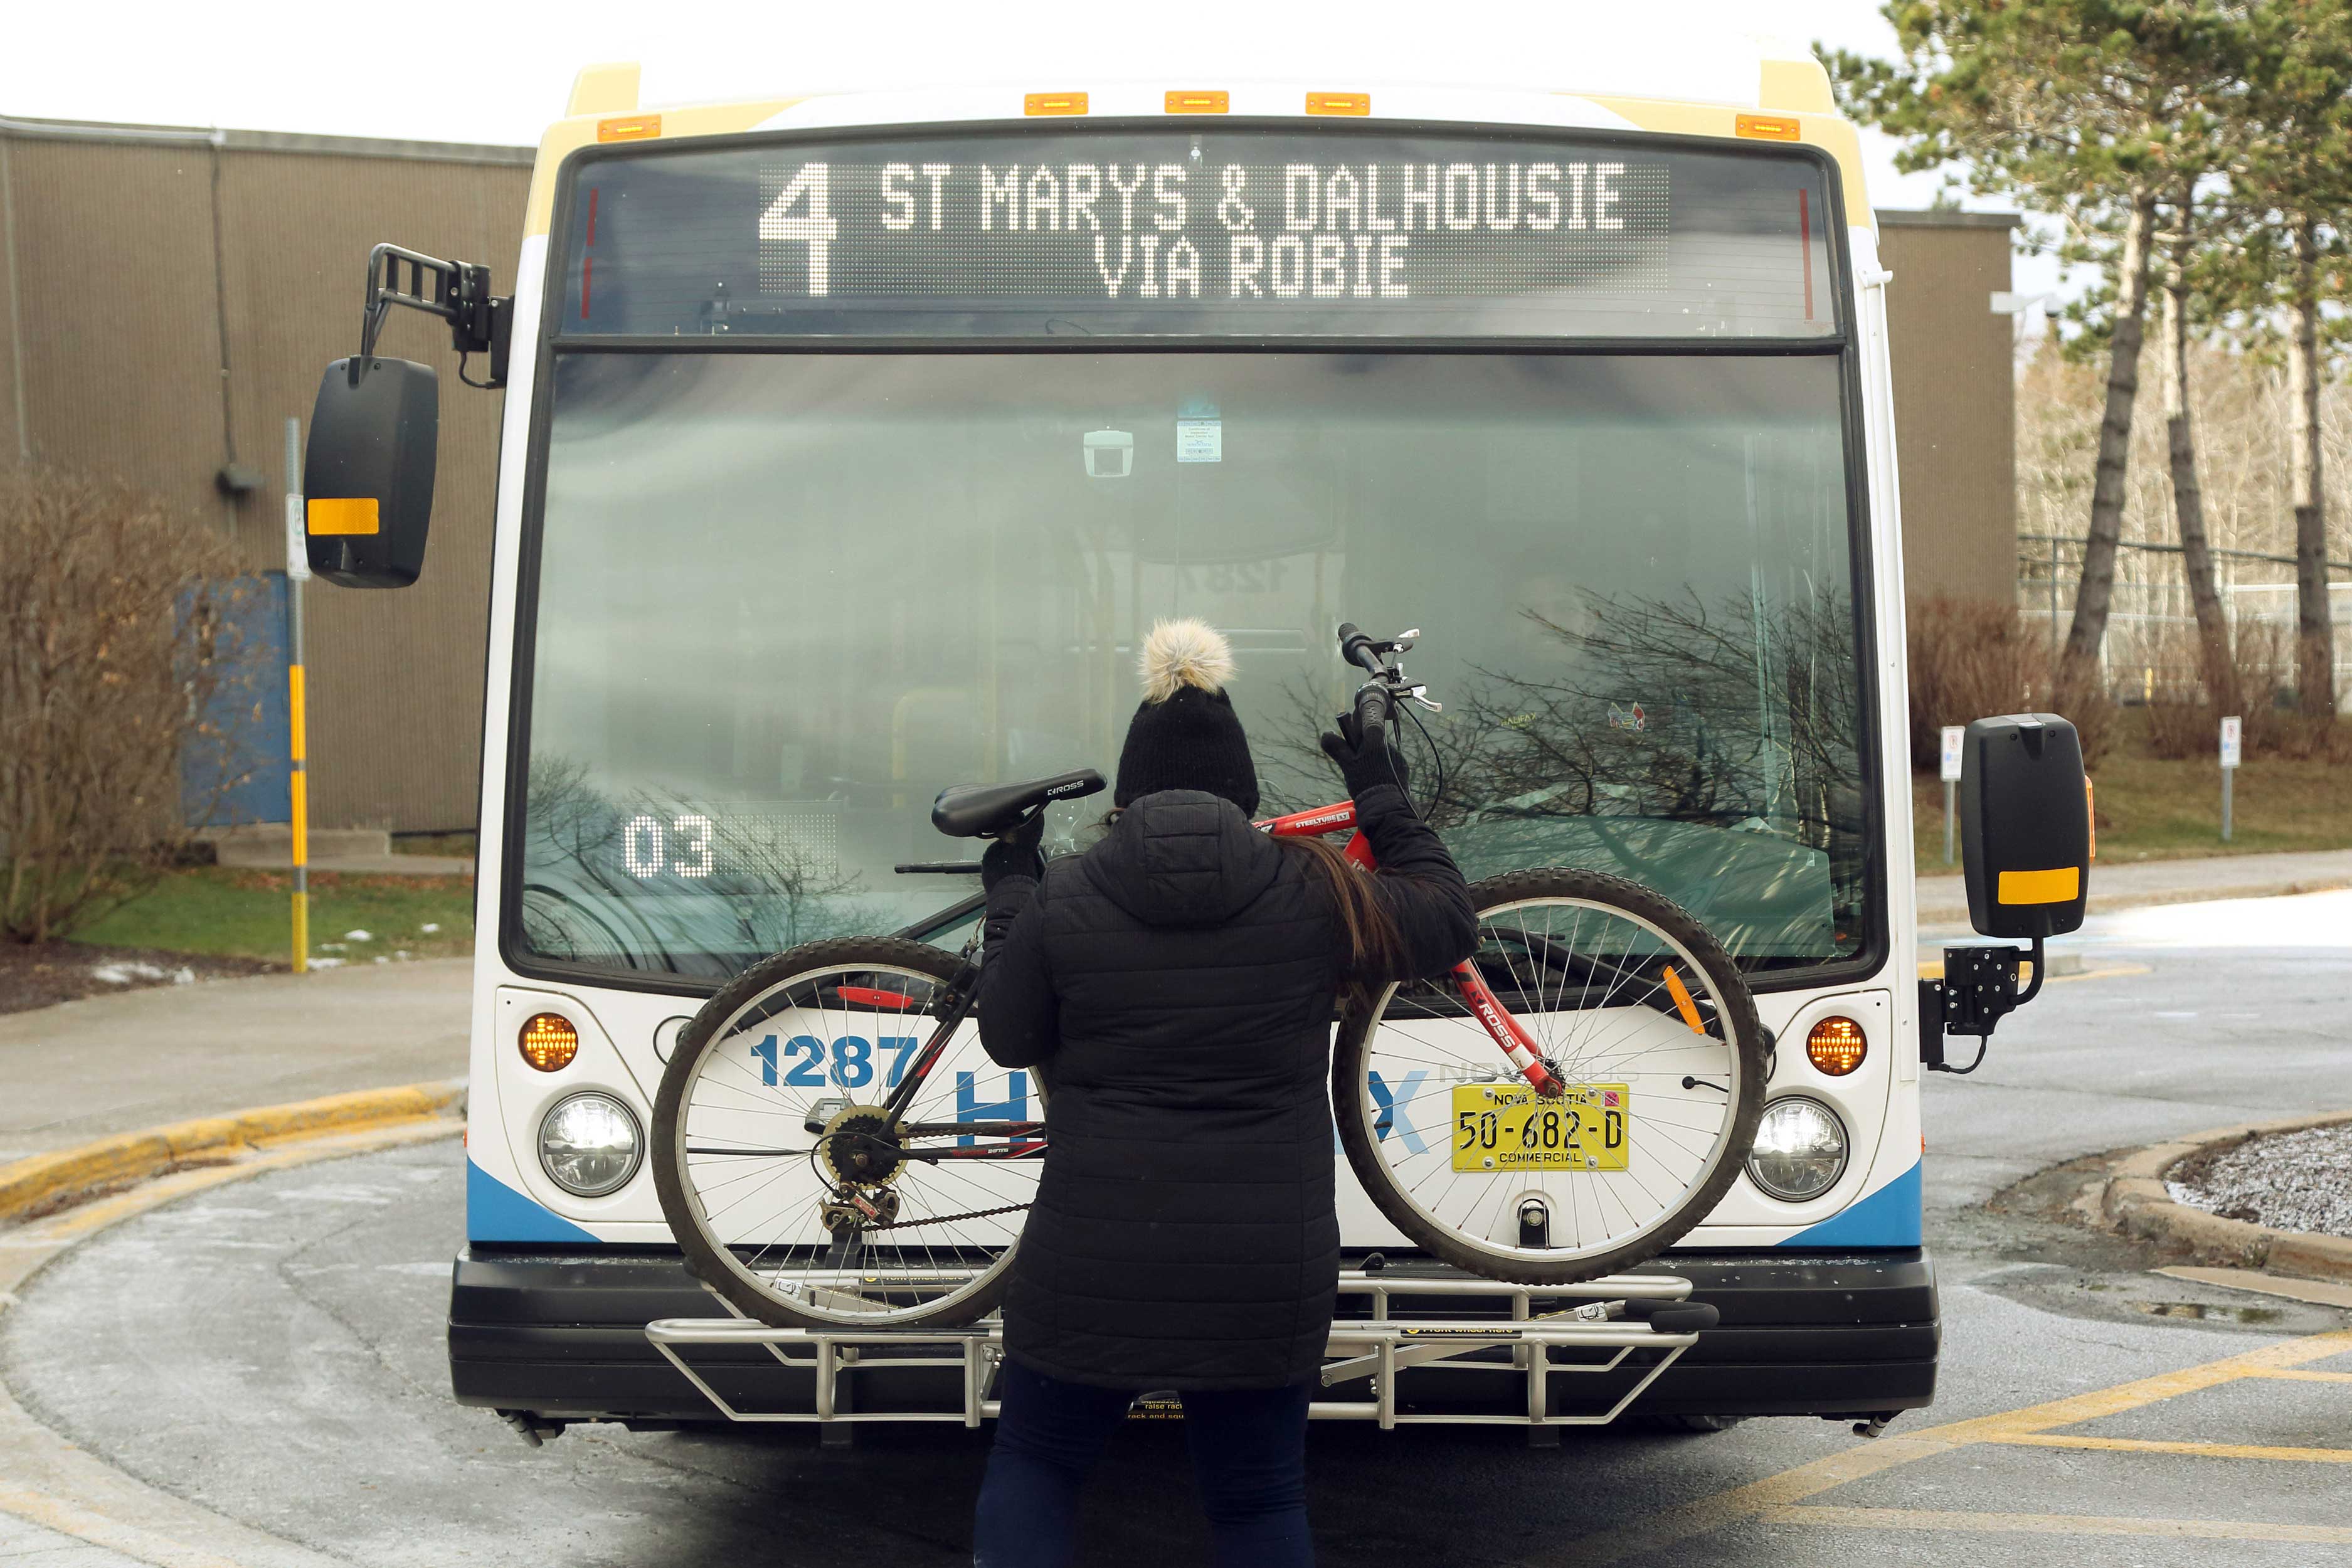 person loading bike on bike rack on the front of a bus